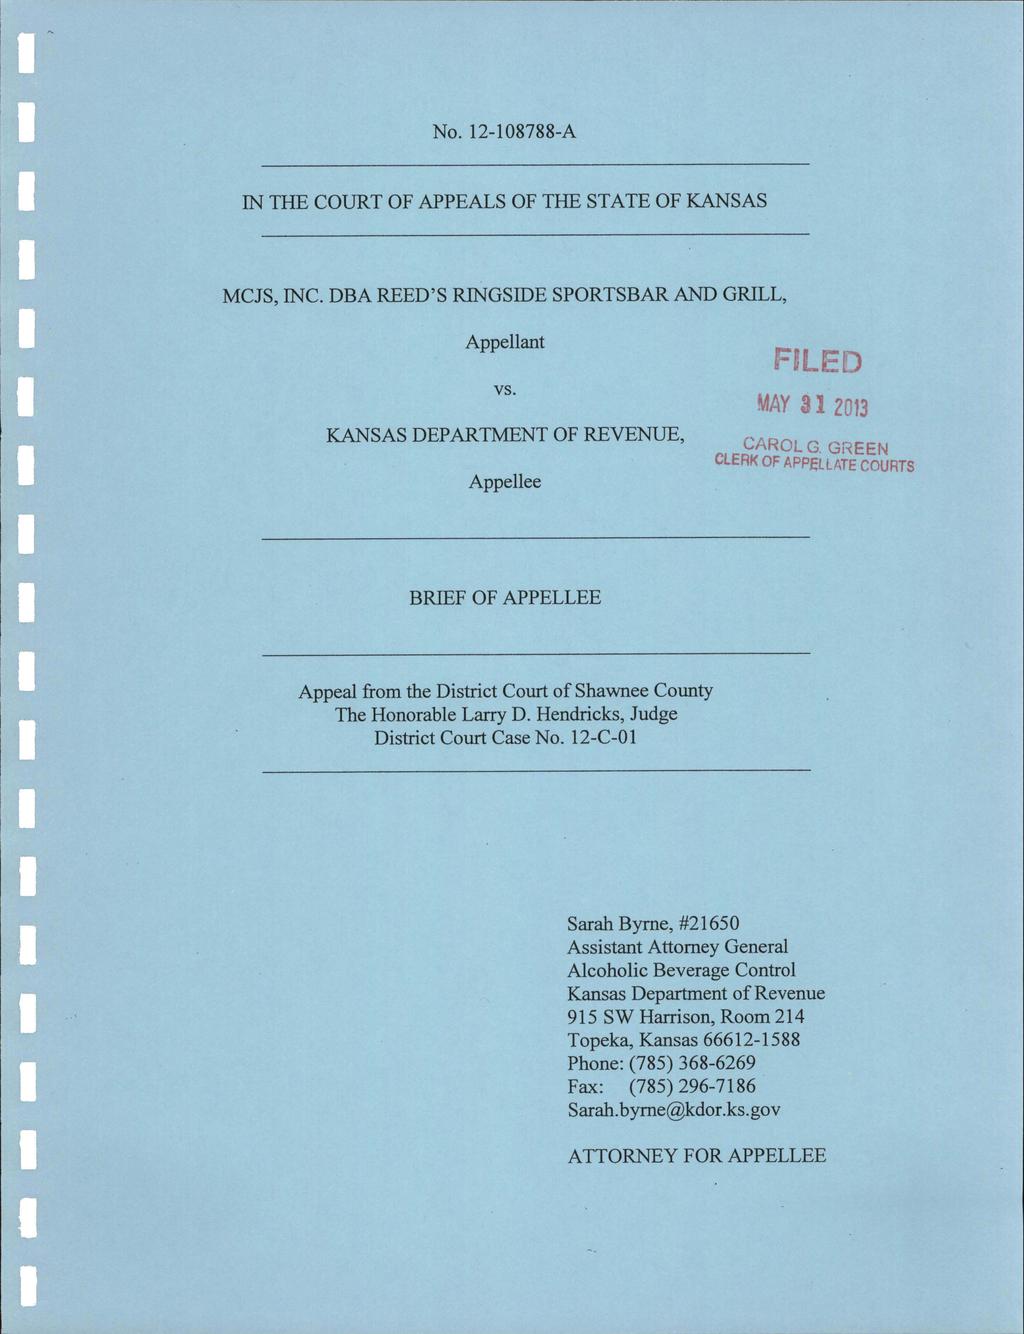 No. 12-108788-A IN THE COURT OF APPEALS OF THE STATE OF KANSAS MCJS, INC. DBA REED'S RINGSIDE SPORTSBAR AND GRILL, Appellant vs. KANSAS DEPARTMENT OF REVENUE, Appellee MAY 3 2013 CAROL G.